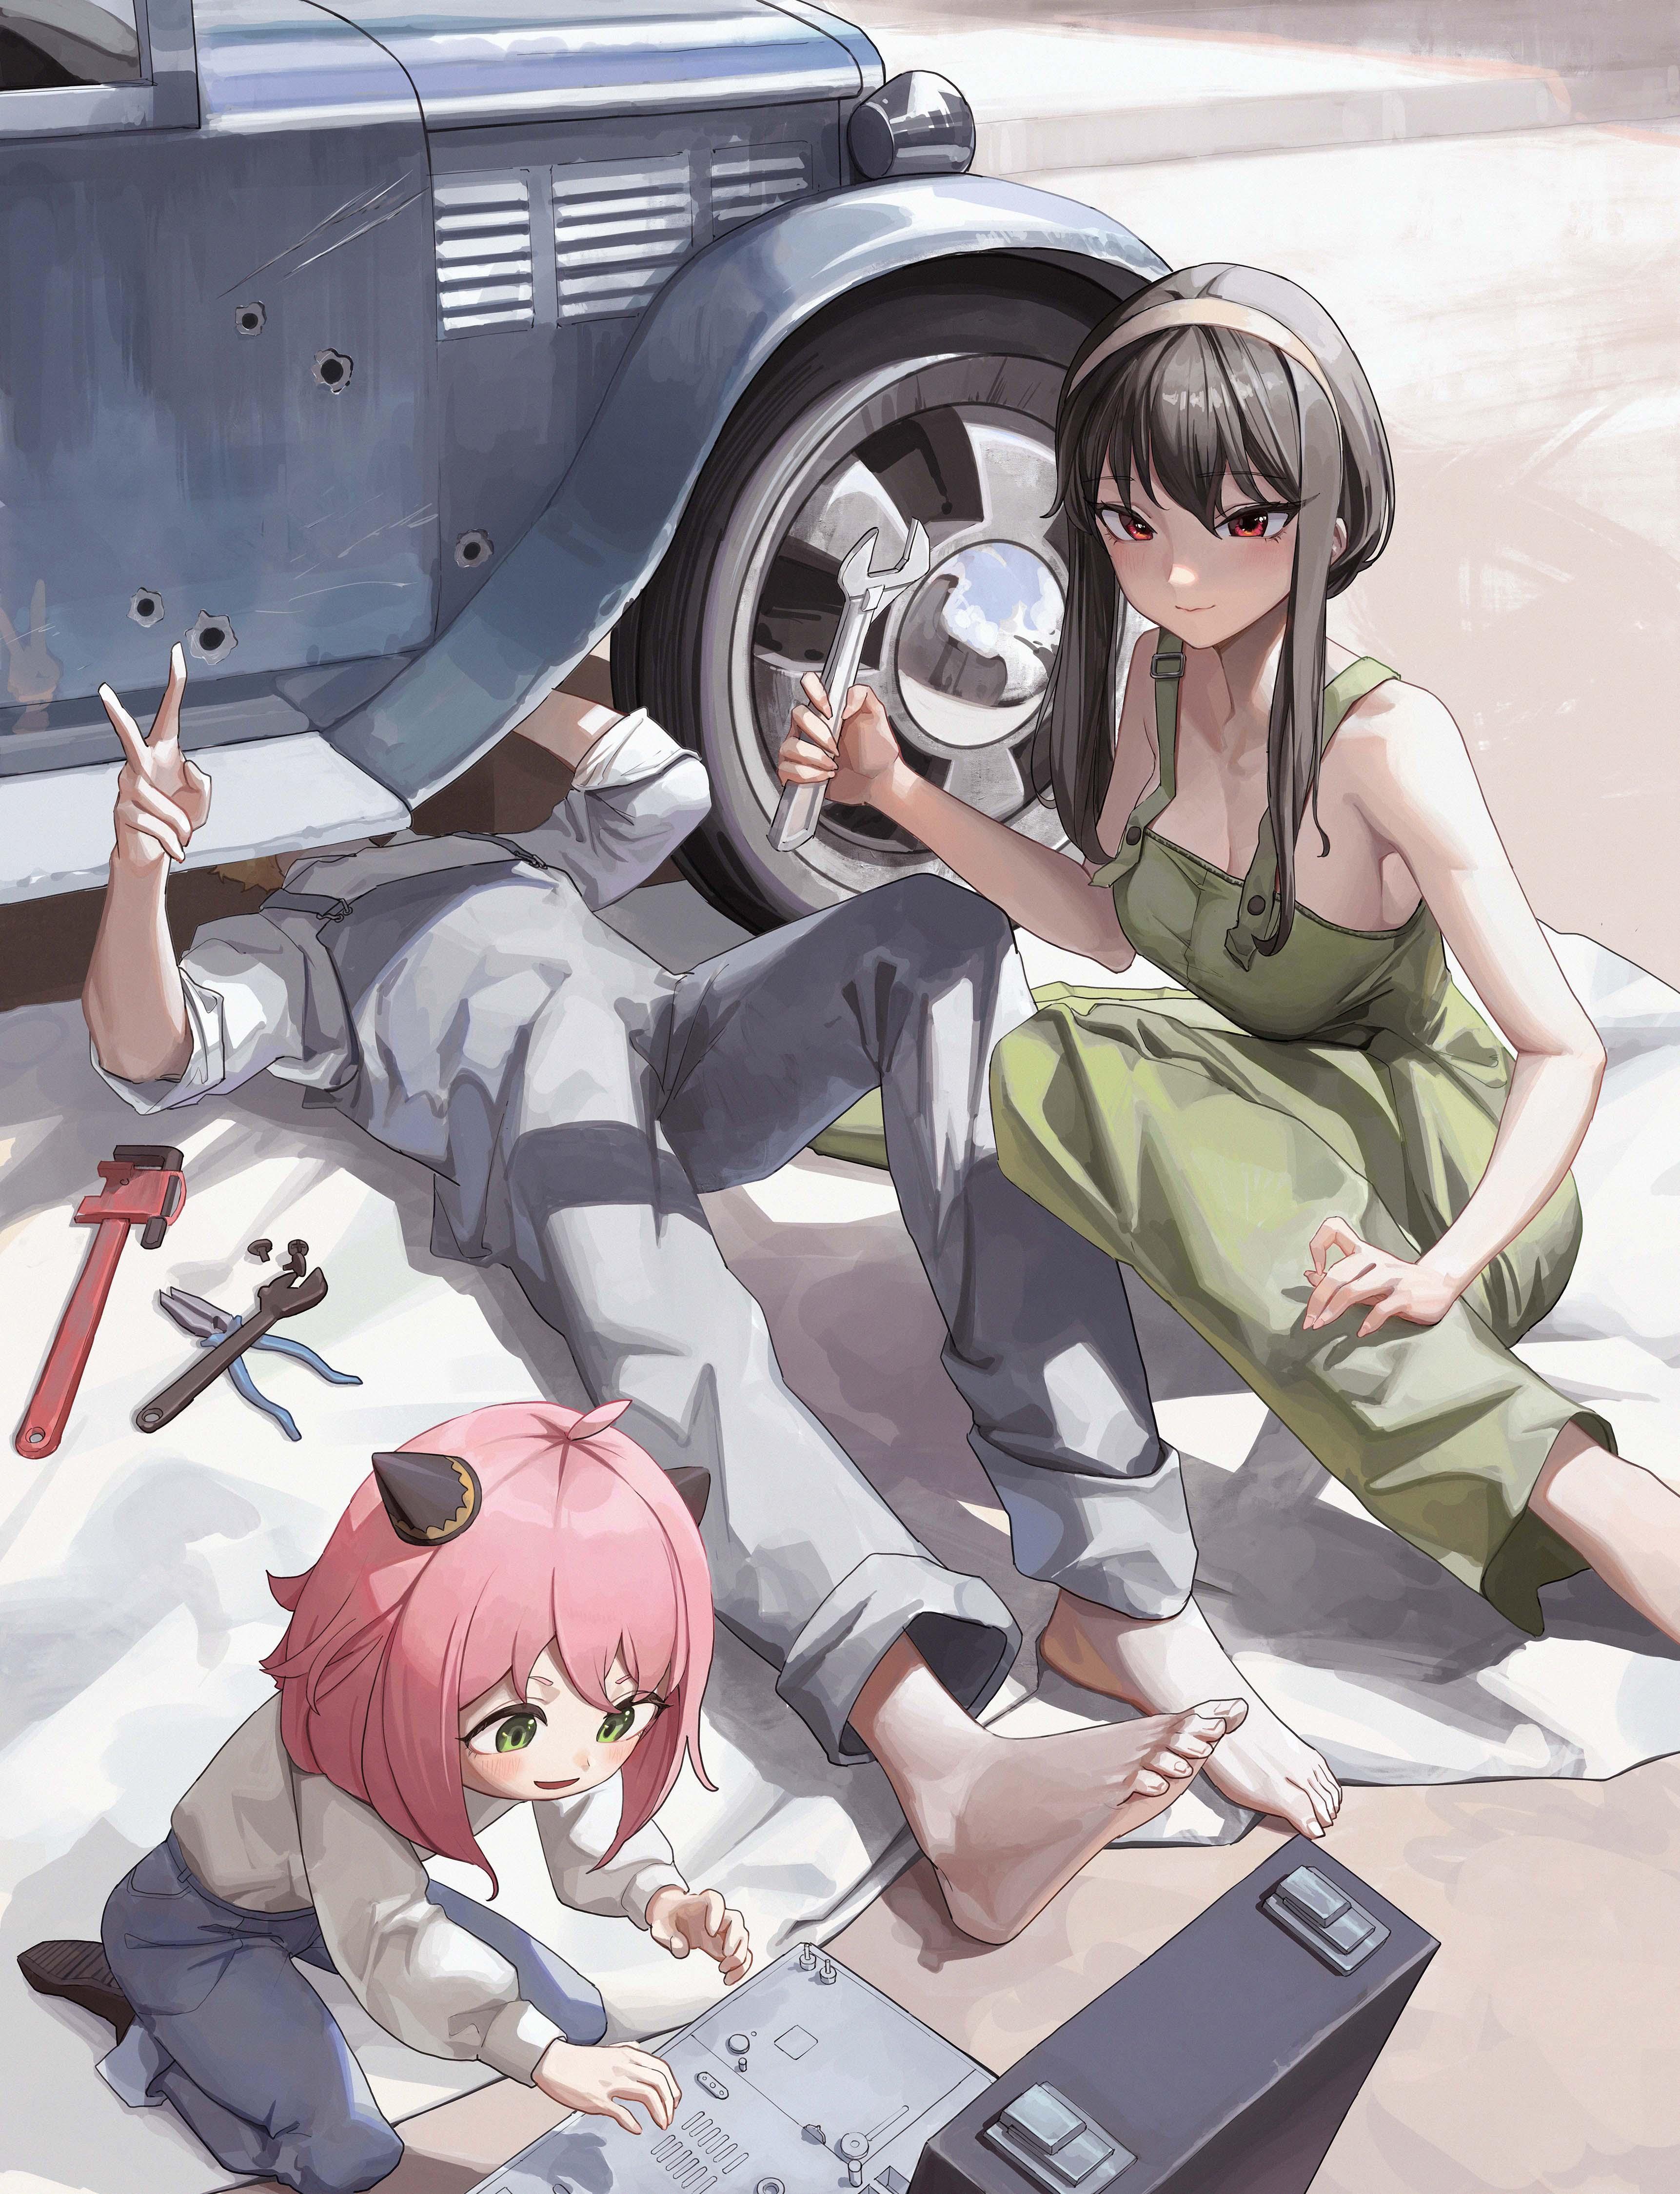 HD wallpaper, Anime, Pink Hair, Spy X Family, Yor Forger, Anya Forger, Red Eyes, Victory Sign, Wrench, Mechanics, Loid Forger, Bullet Holes, Car Repair